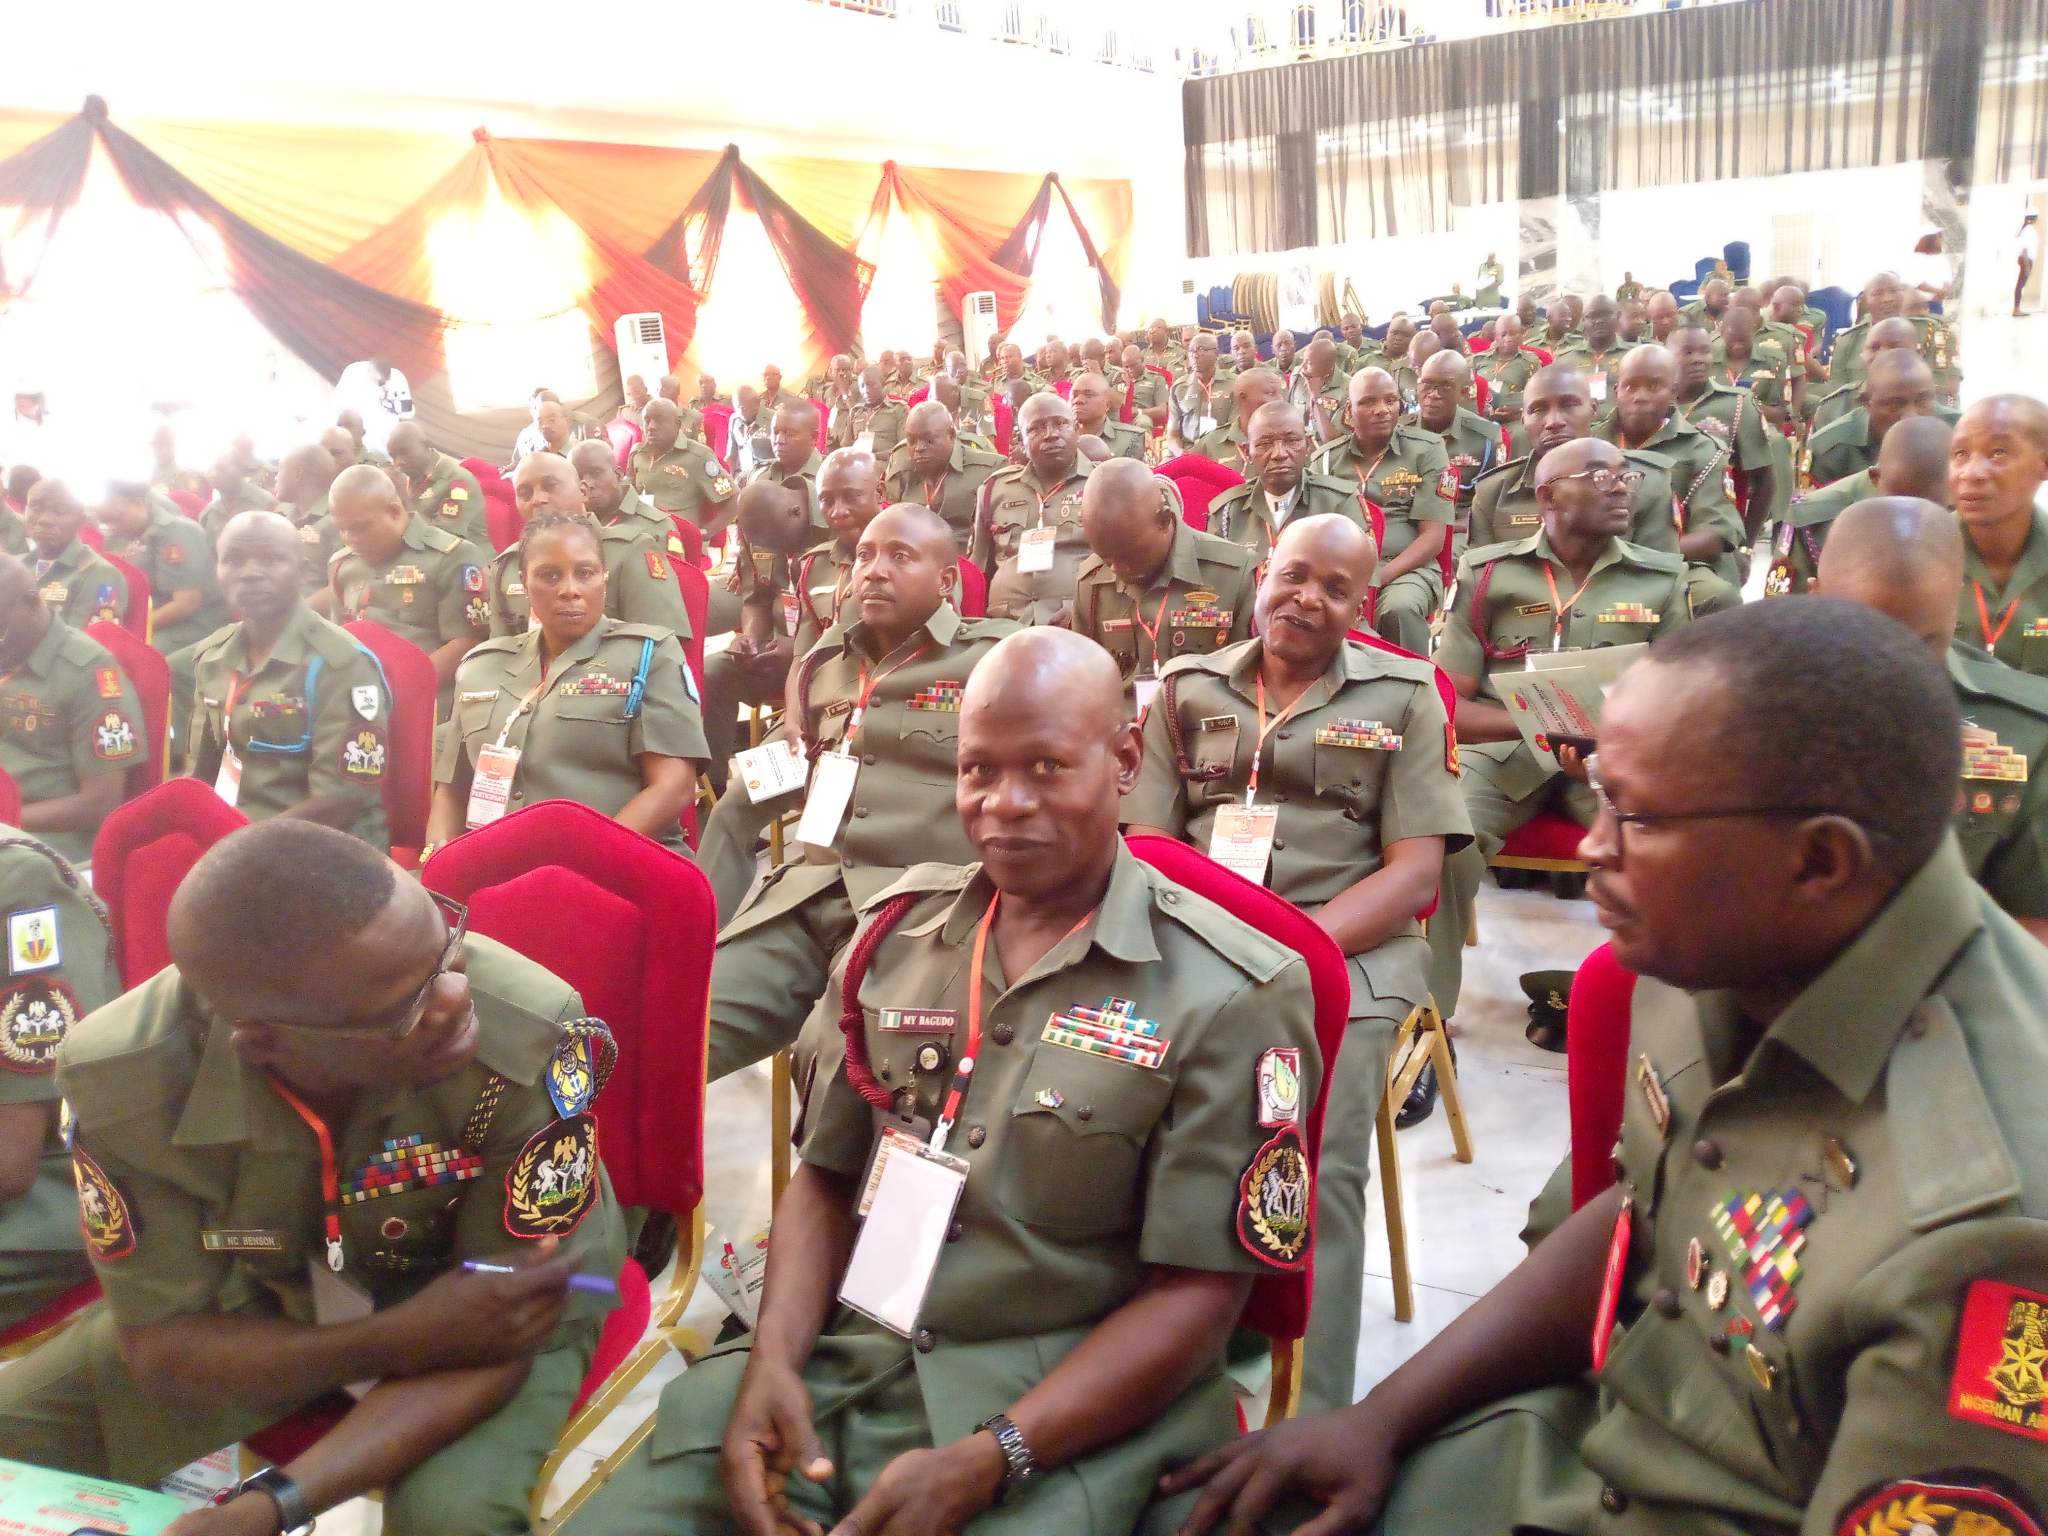 Army Chief, Lt. Gen. Faruk Charges Nigerian RSMs to Uphold Discipline and Professionalism